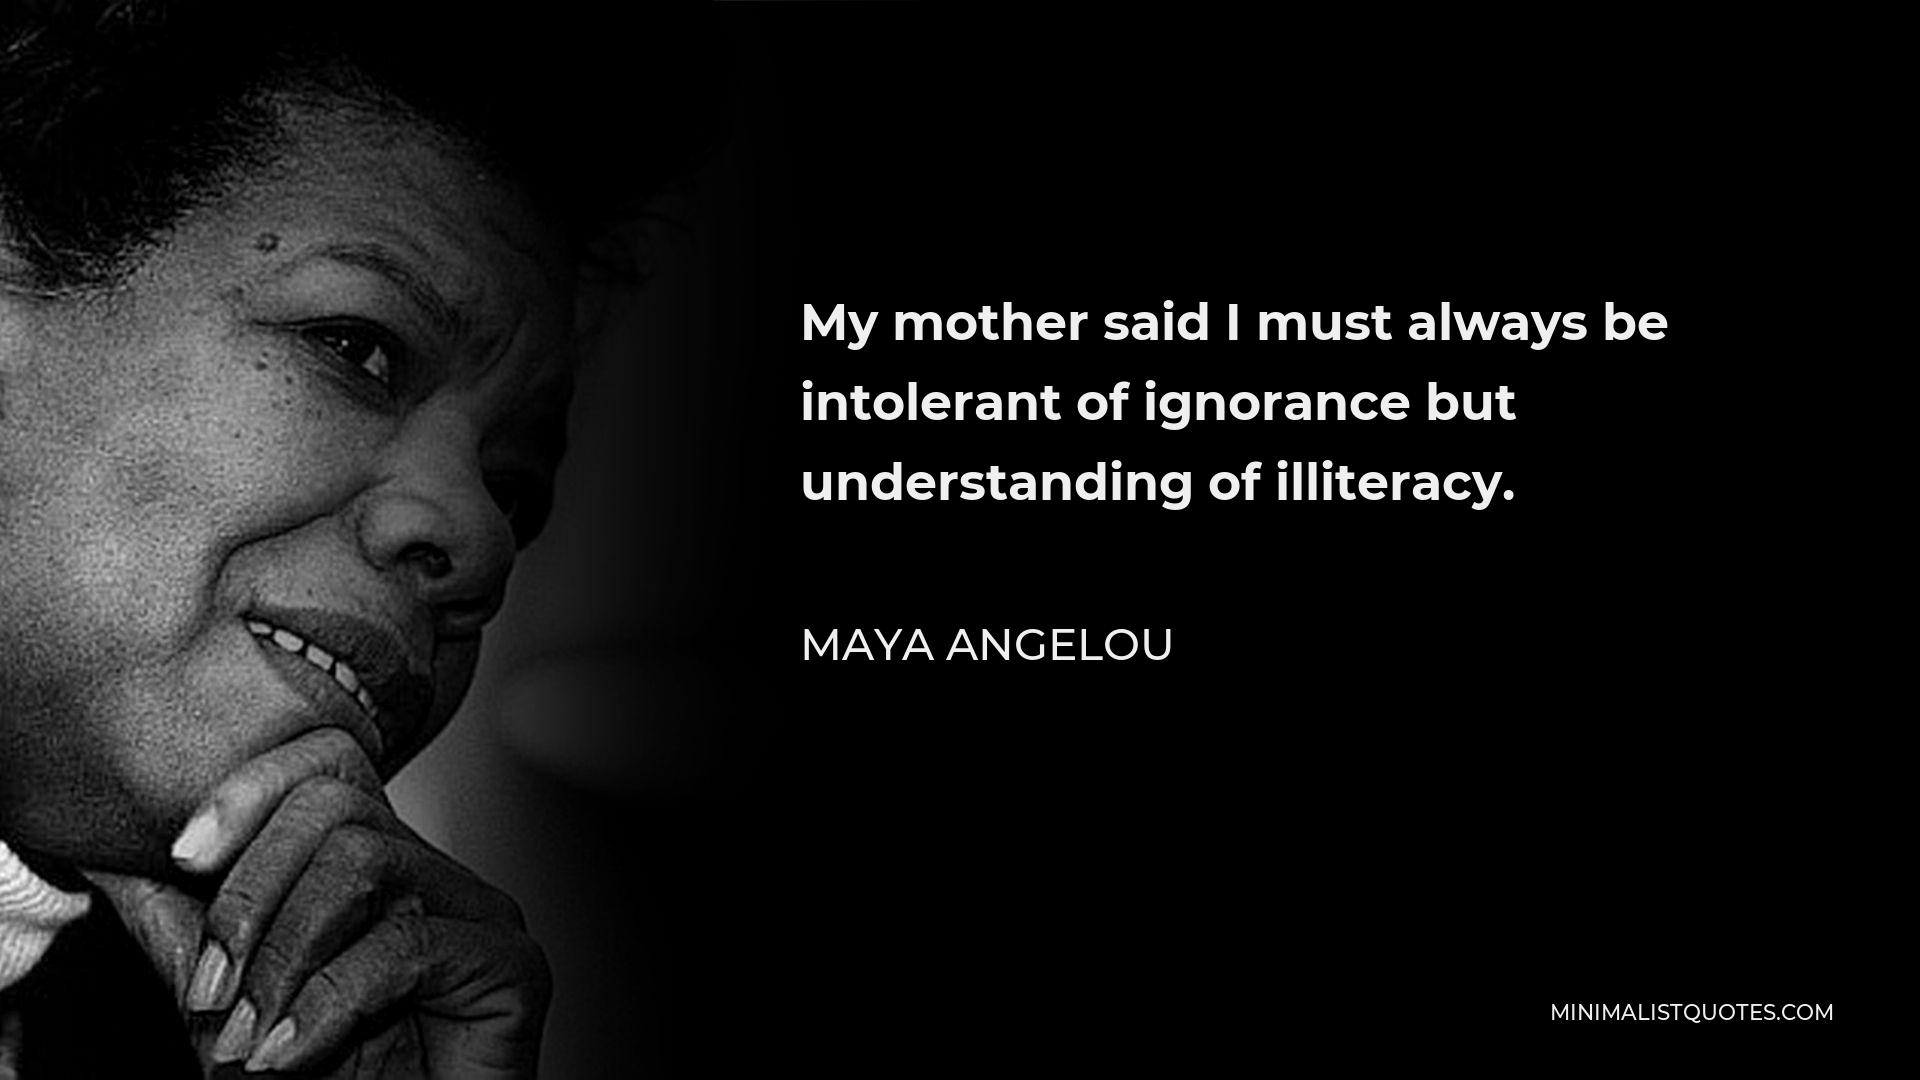 Maya Angelou Quote - My mother said I must always be intolerant of ignorance but understanding of illiteracy.